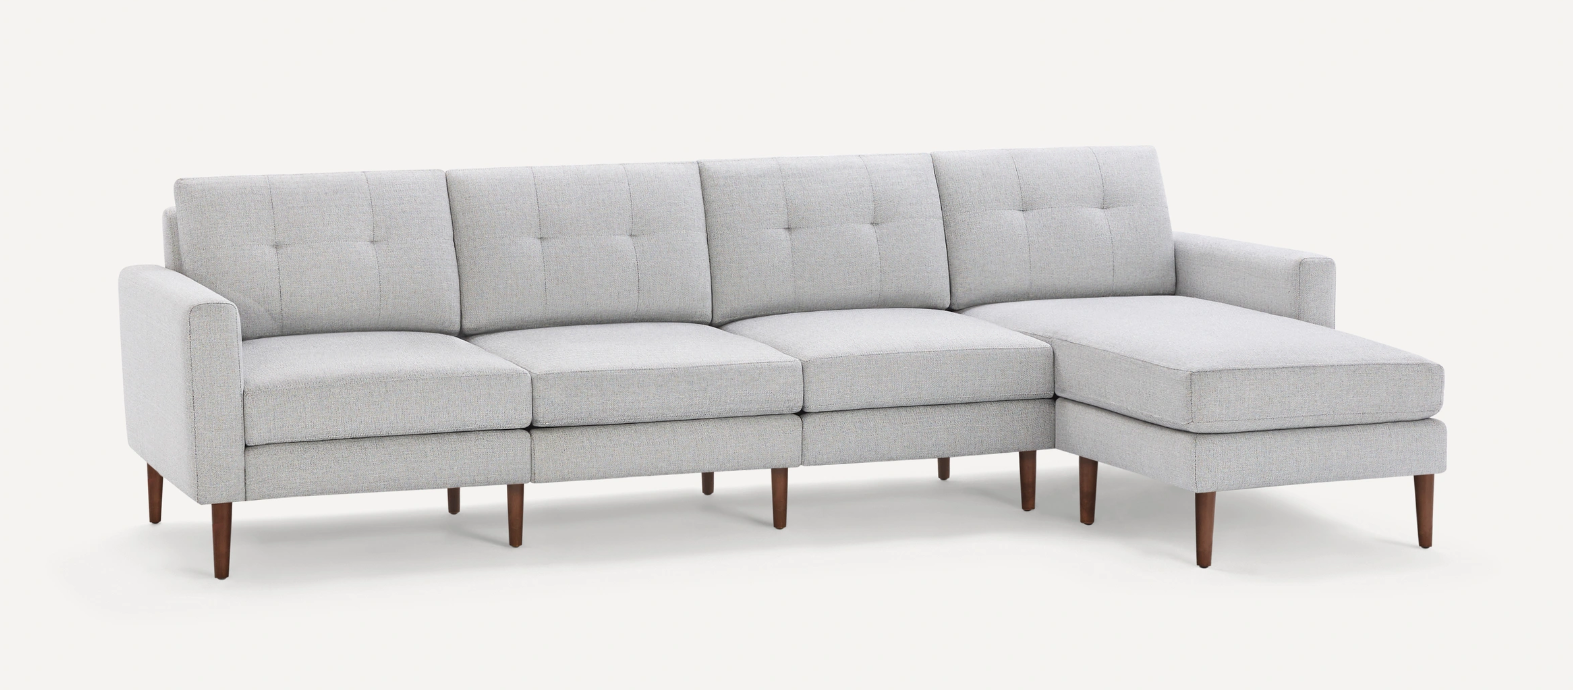 Burrow Nomad Sectional Sofa in modern living room setting